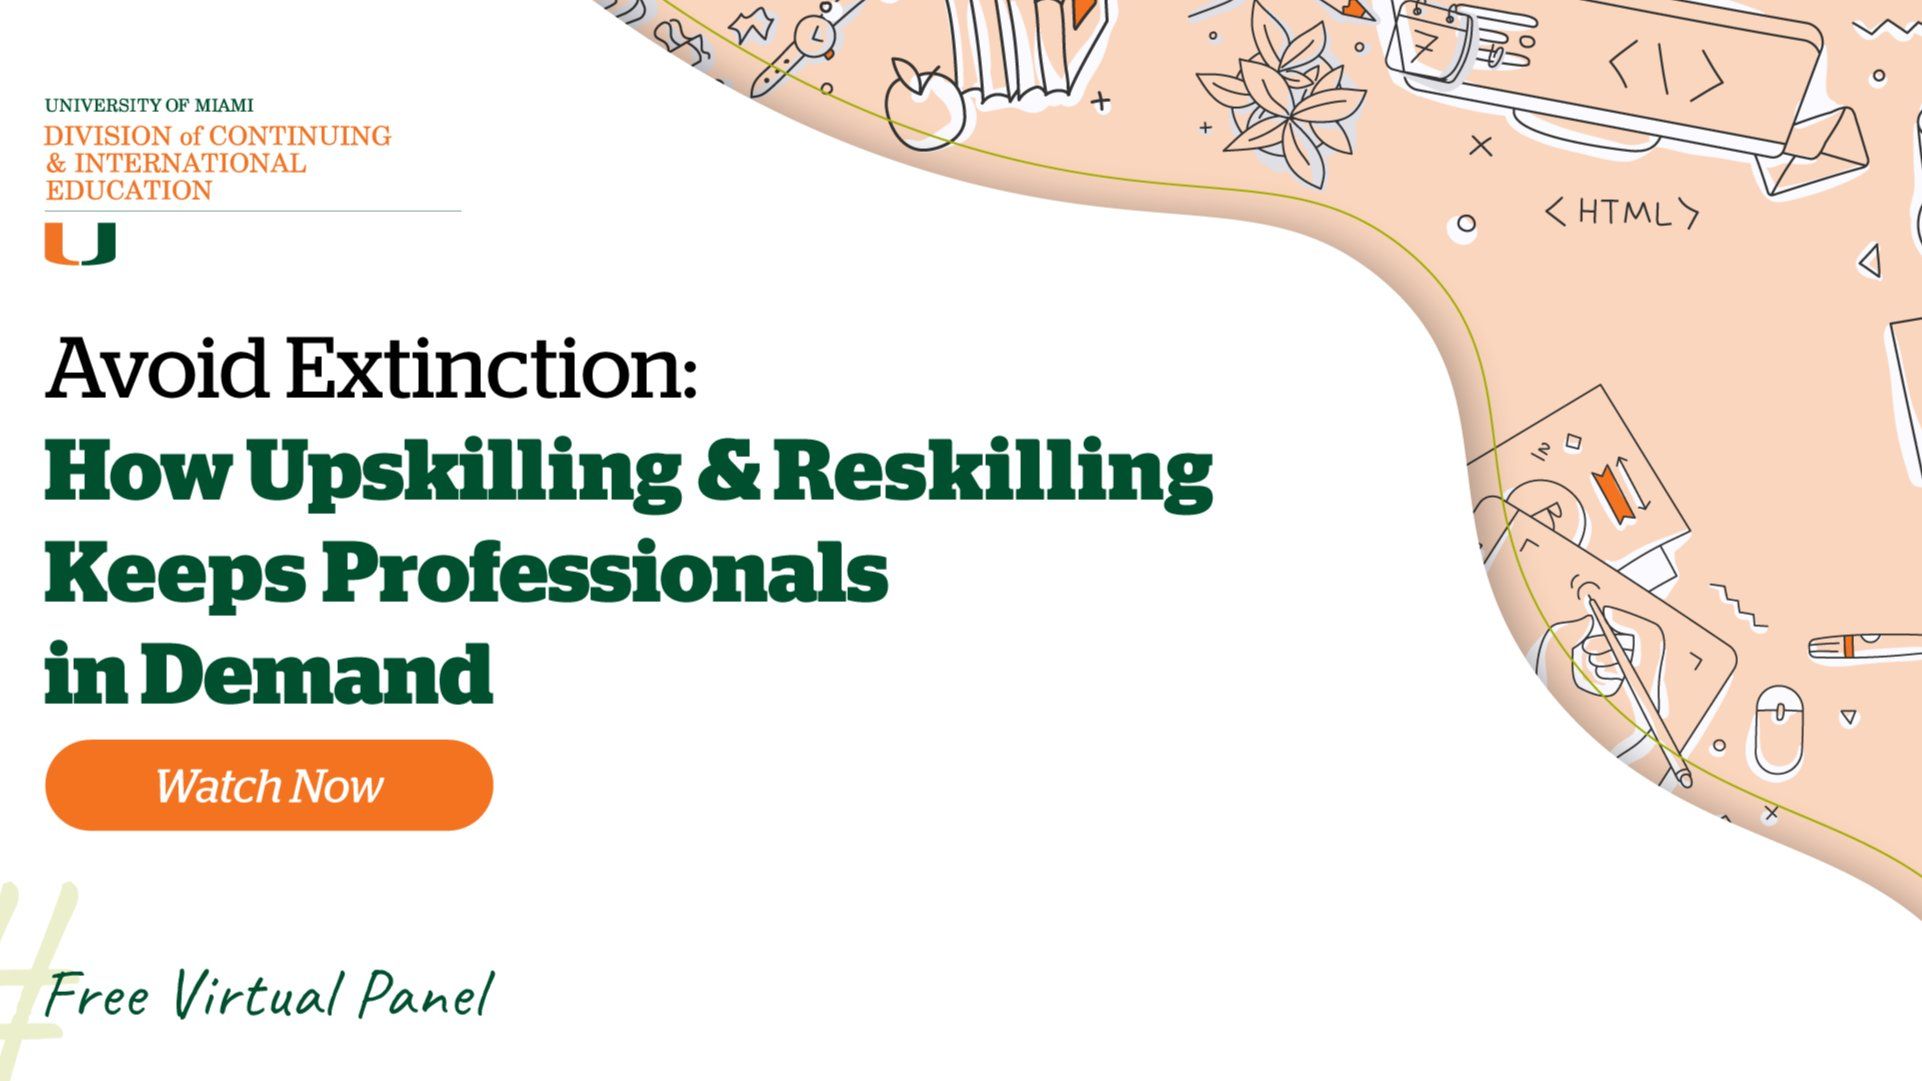 Avoid Extinction: How Upskilling & Reskilling Keeps Professionals in Demand